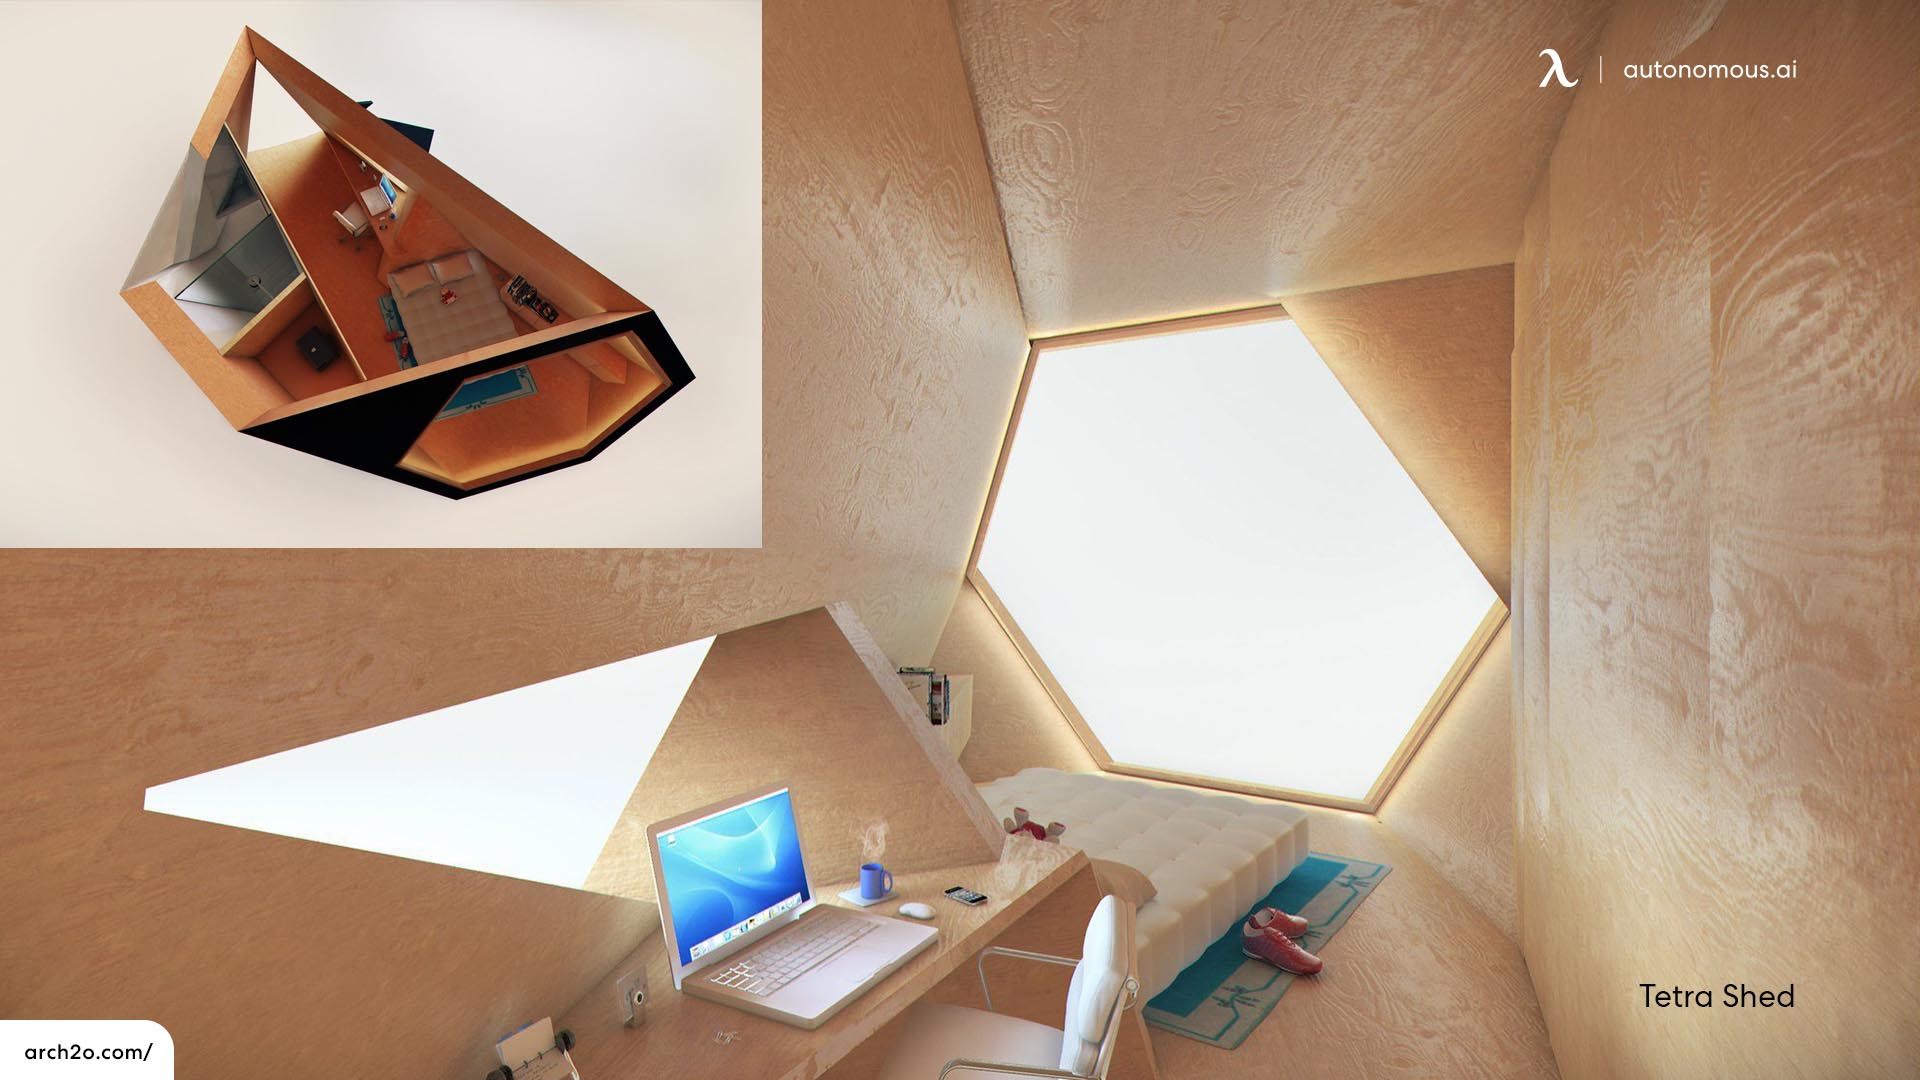 Tetra Shed outdoor office pod